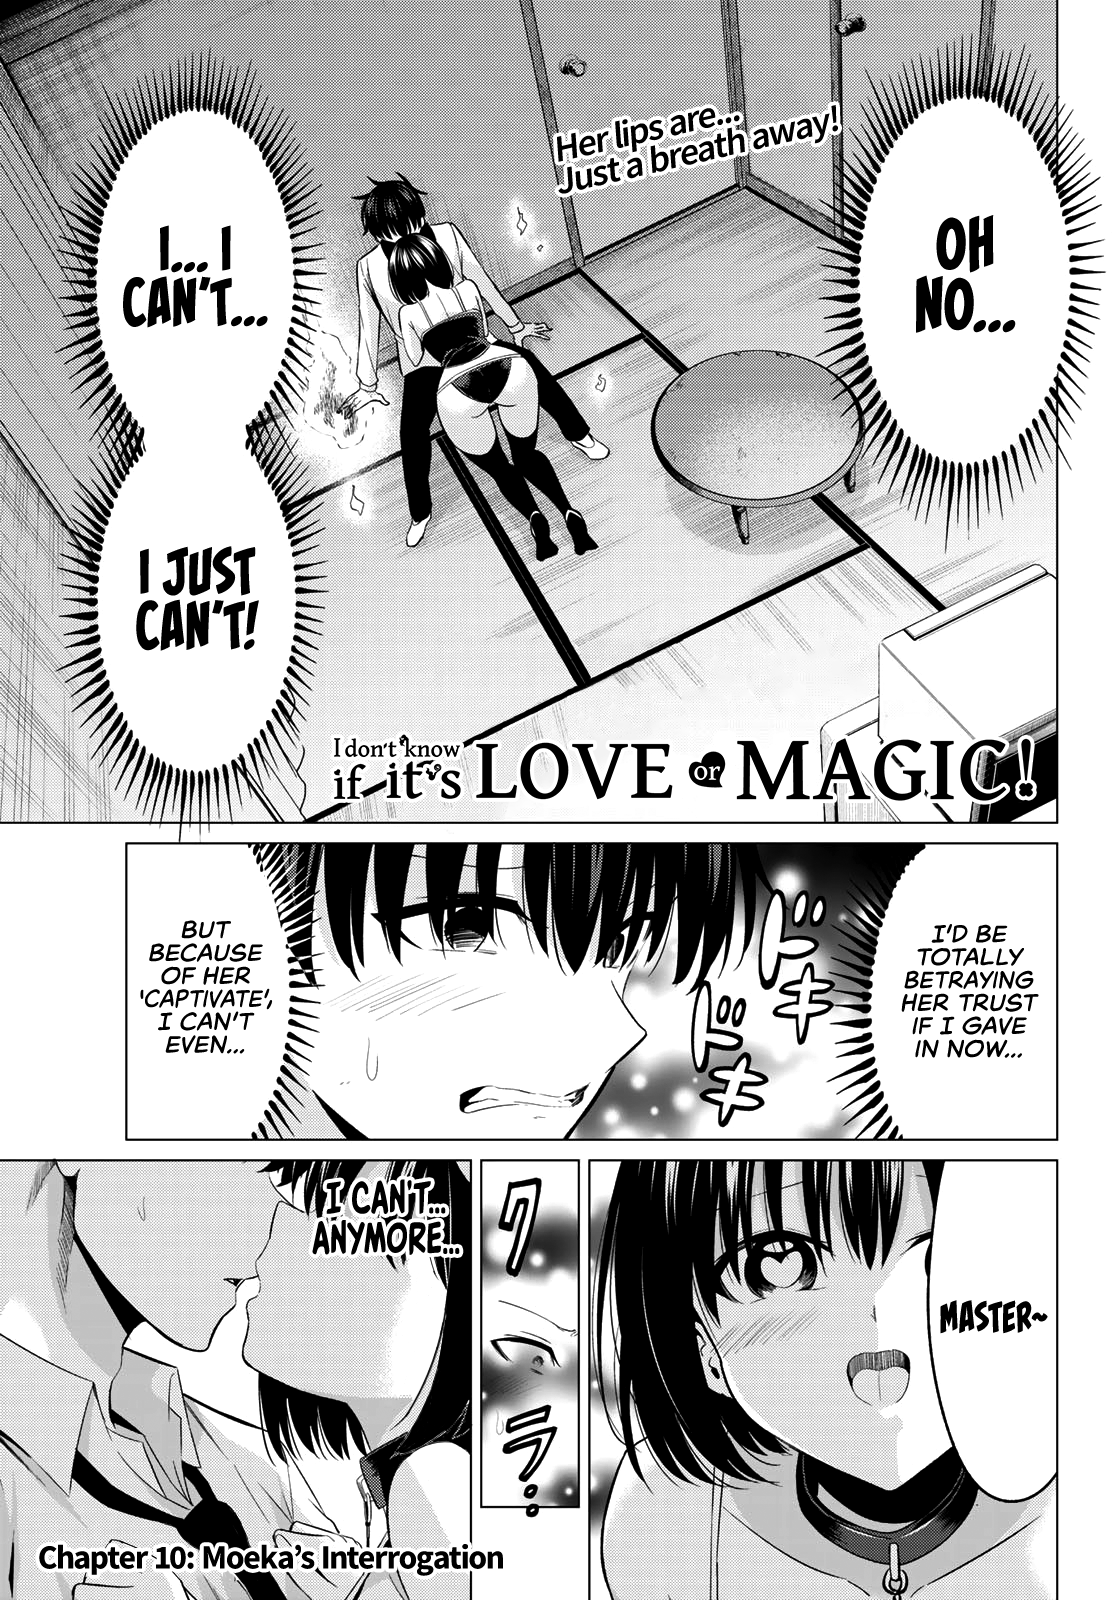 I Don't Know If It's Love Or Magic! - Page 2